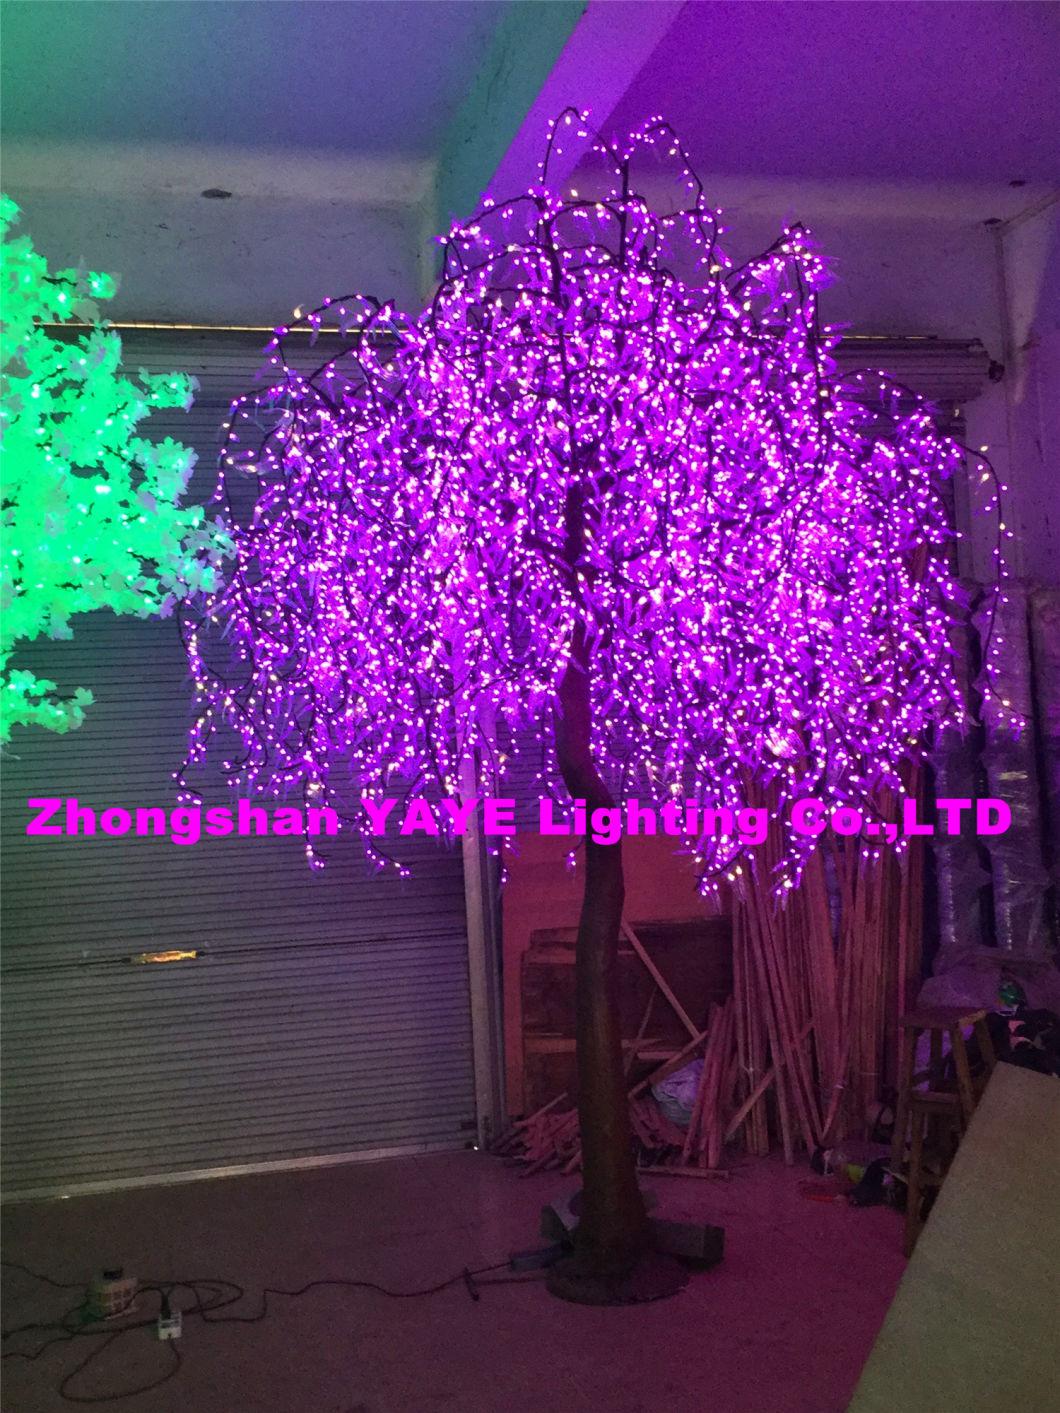 Yaye 2021 Hot Sell Waterproof IP65 RGB LED Willow Tree with 3m Diameter/3.5m Height/ 2 Years Warranty